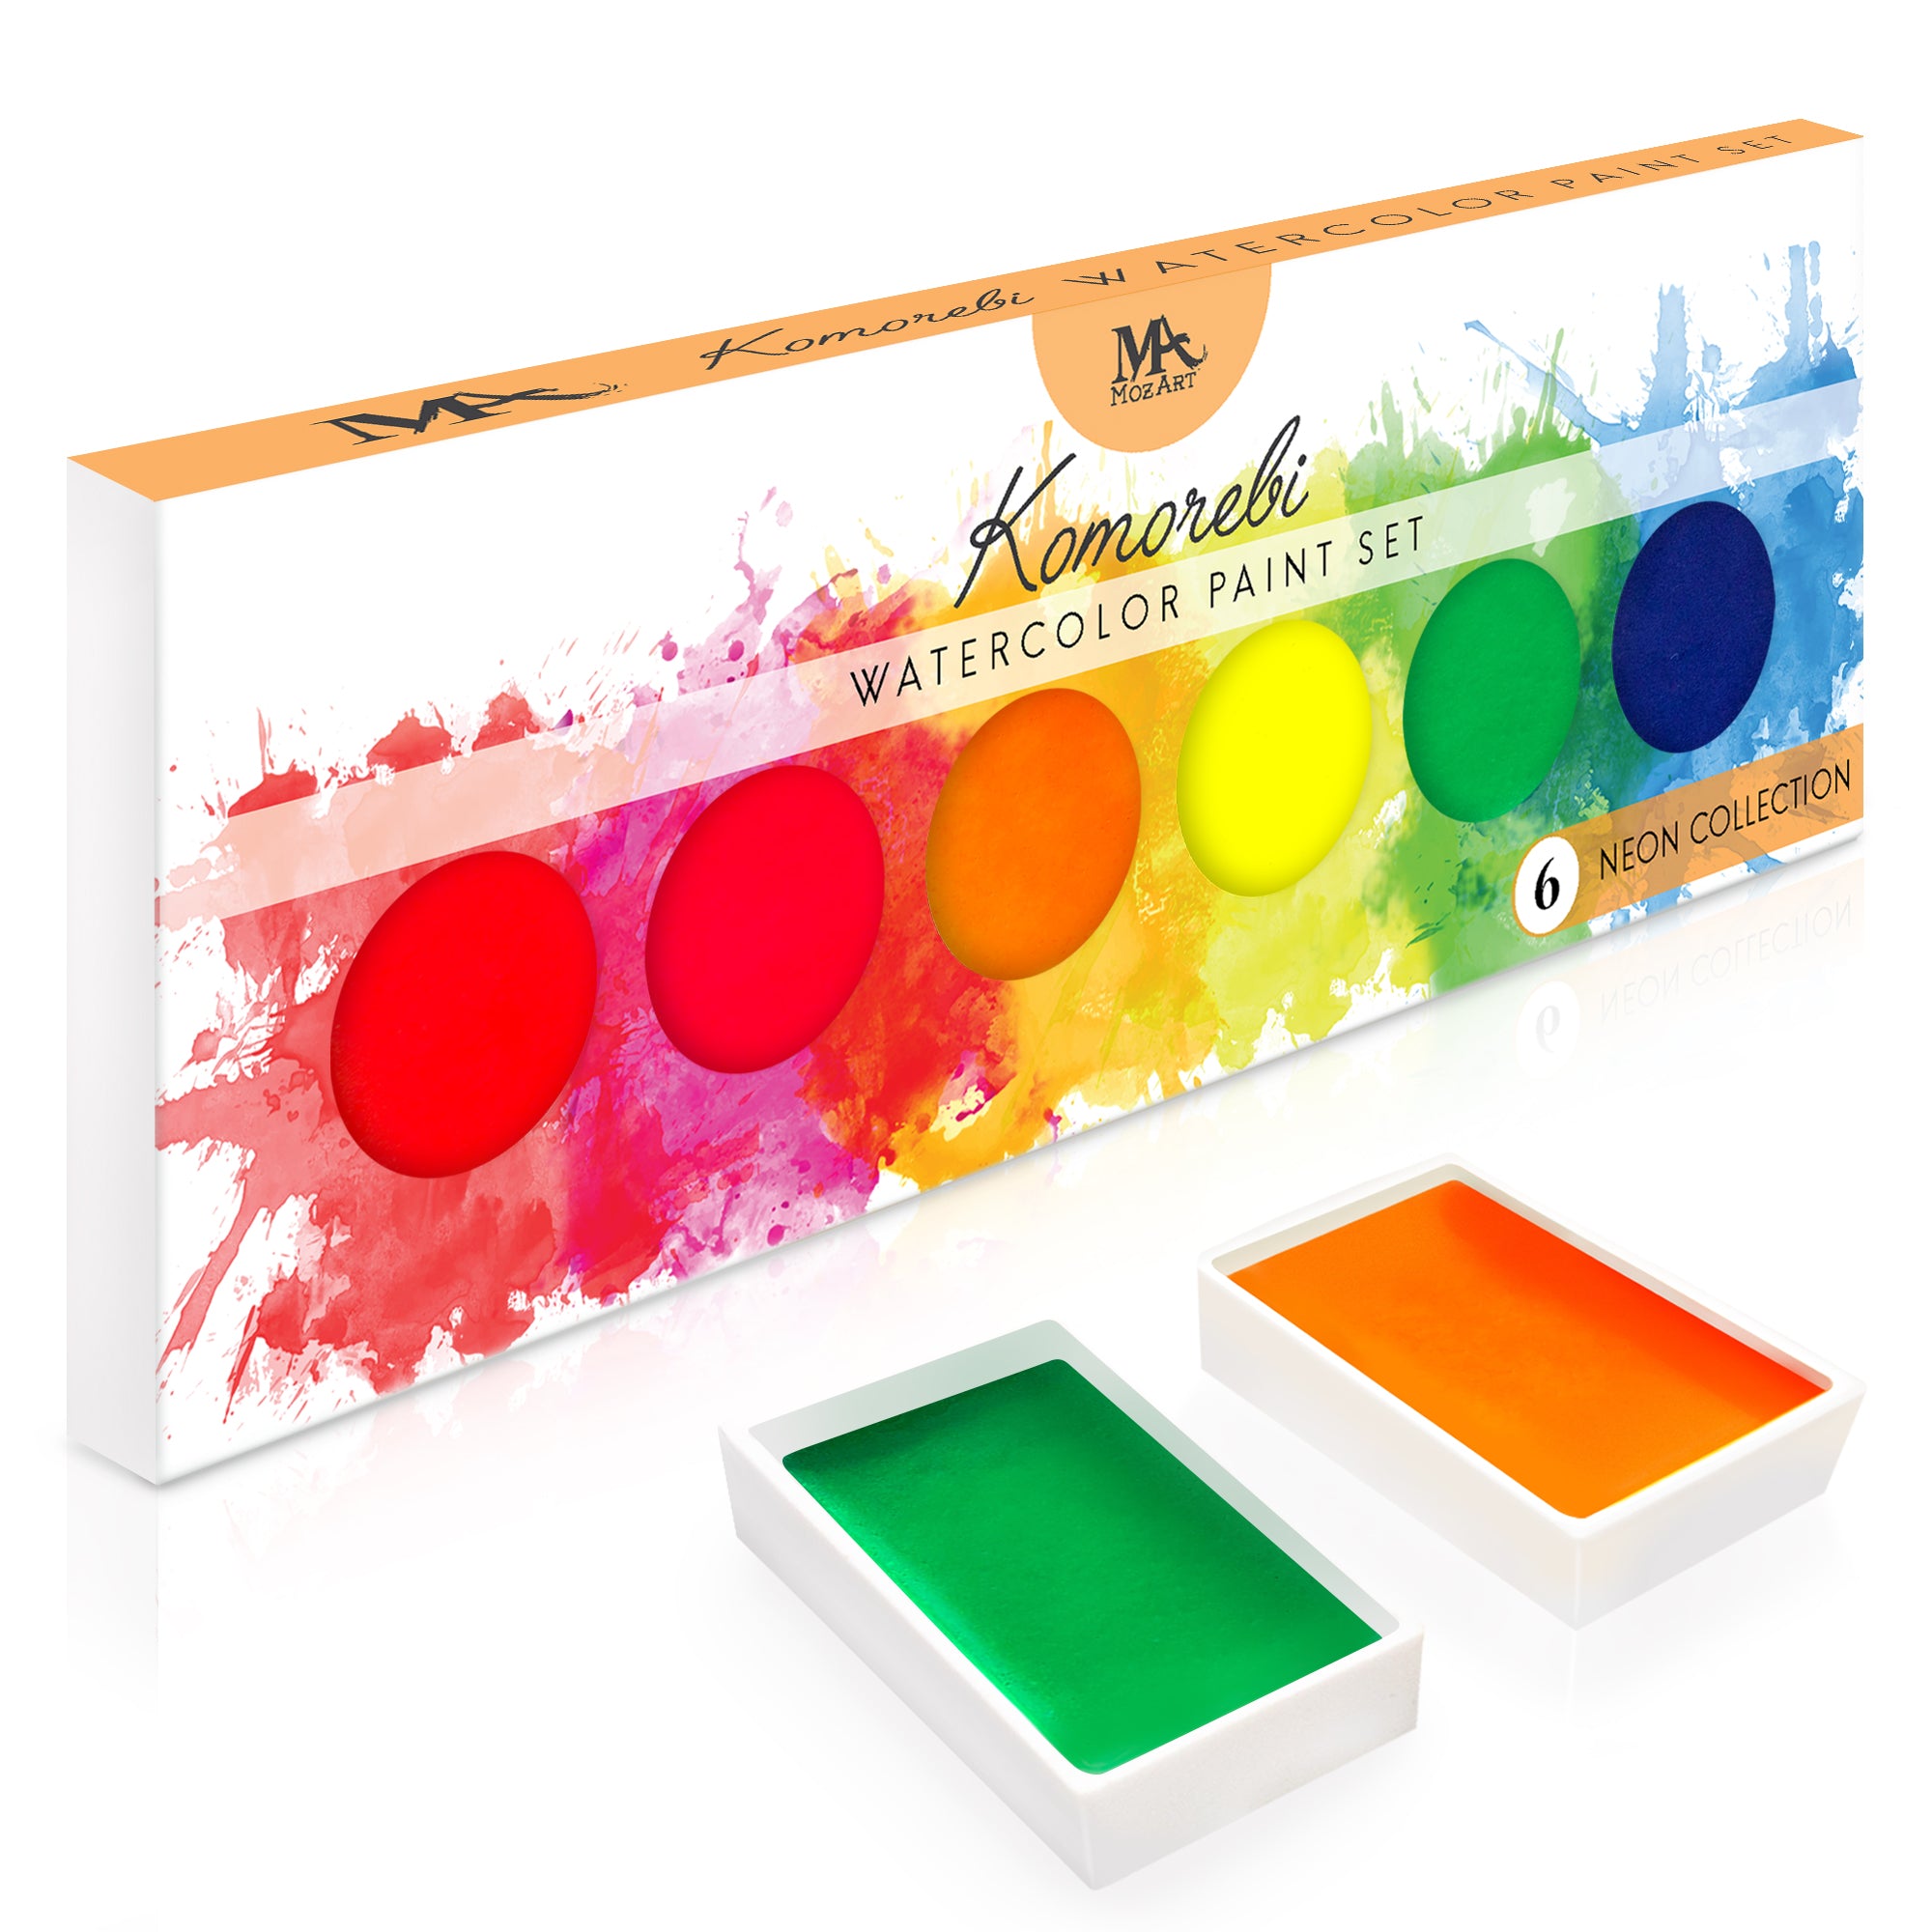 Csy Art Gallery 8 Handmade Watercolor Paint Set NEON Water Color Set-Pro